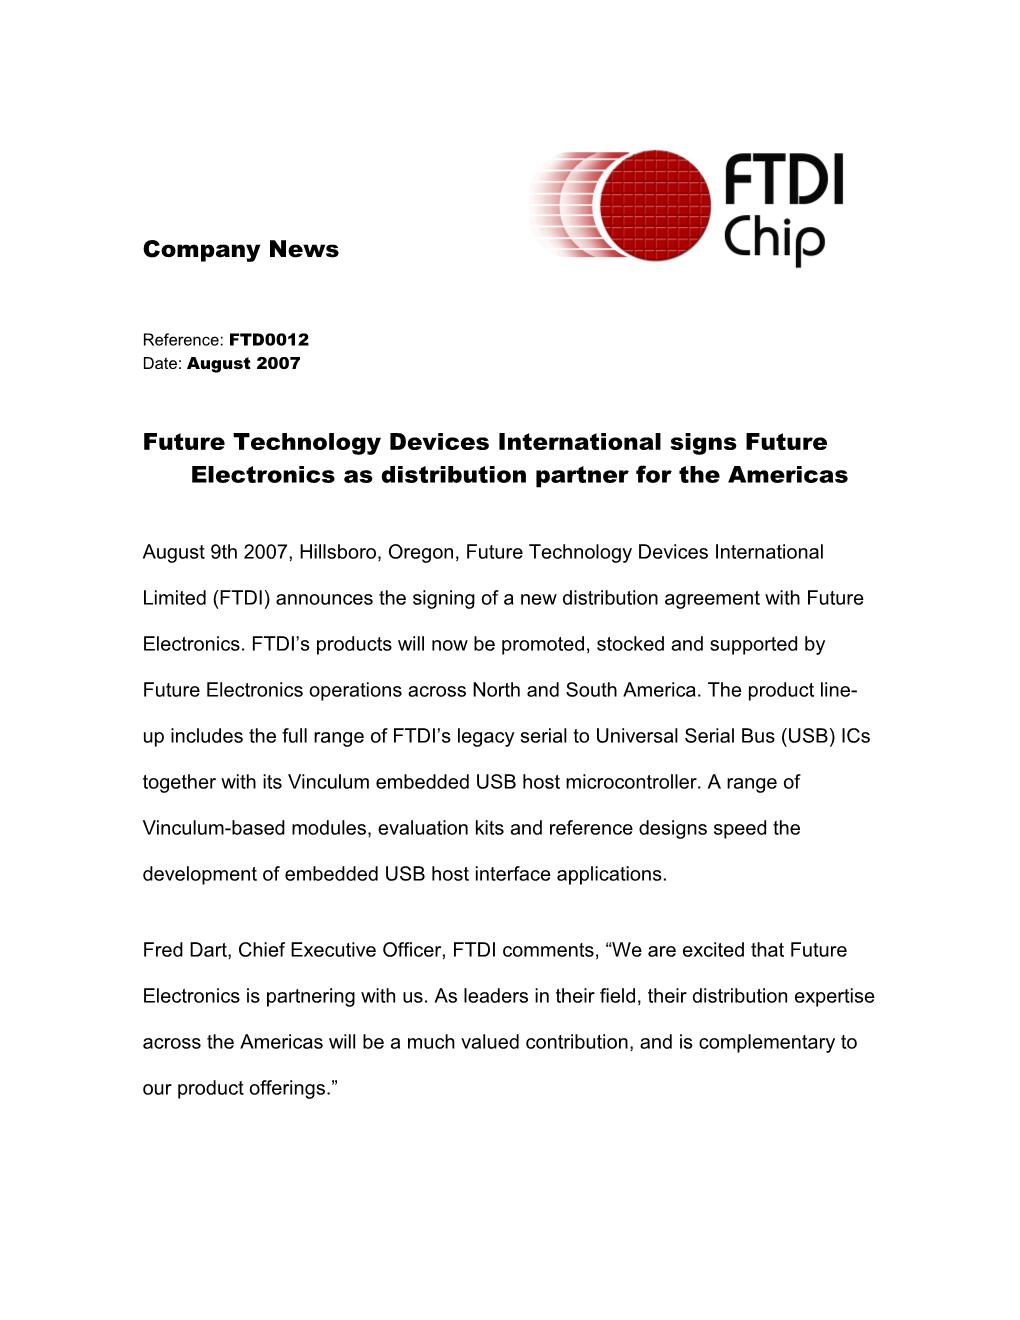 Future Technology Devices International Signs Future Electronics As Distribution Partner